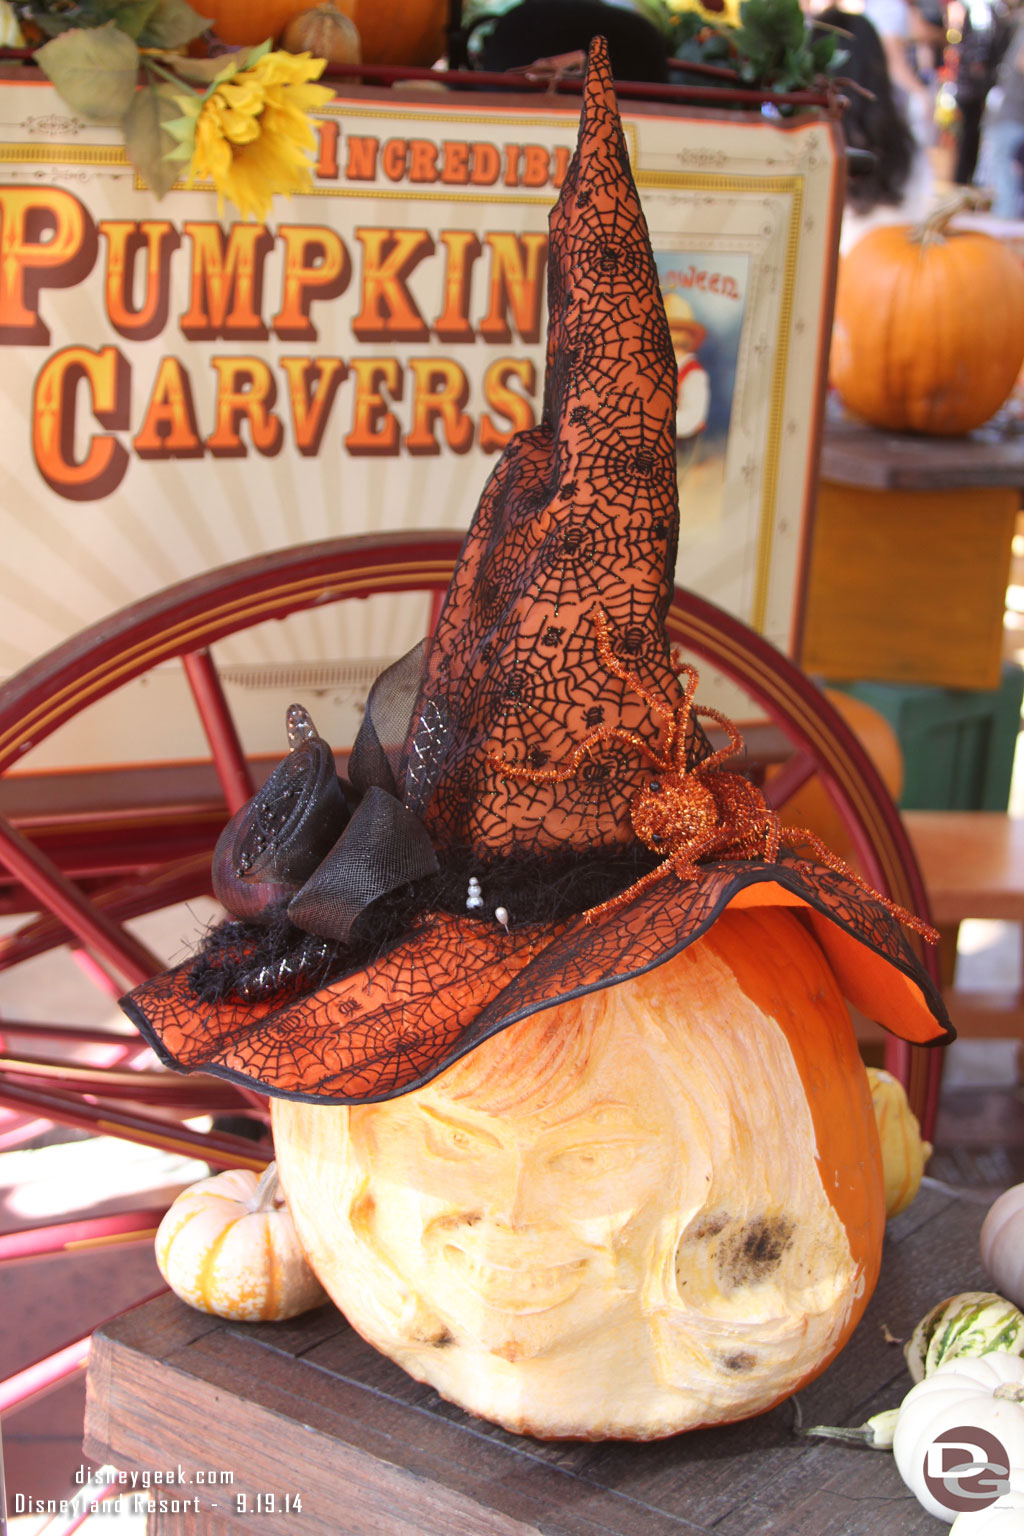 Time to check out the latest pumpkin creations.